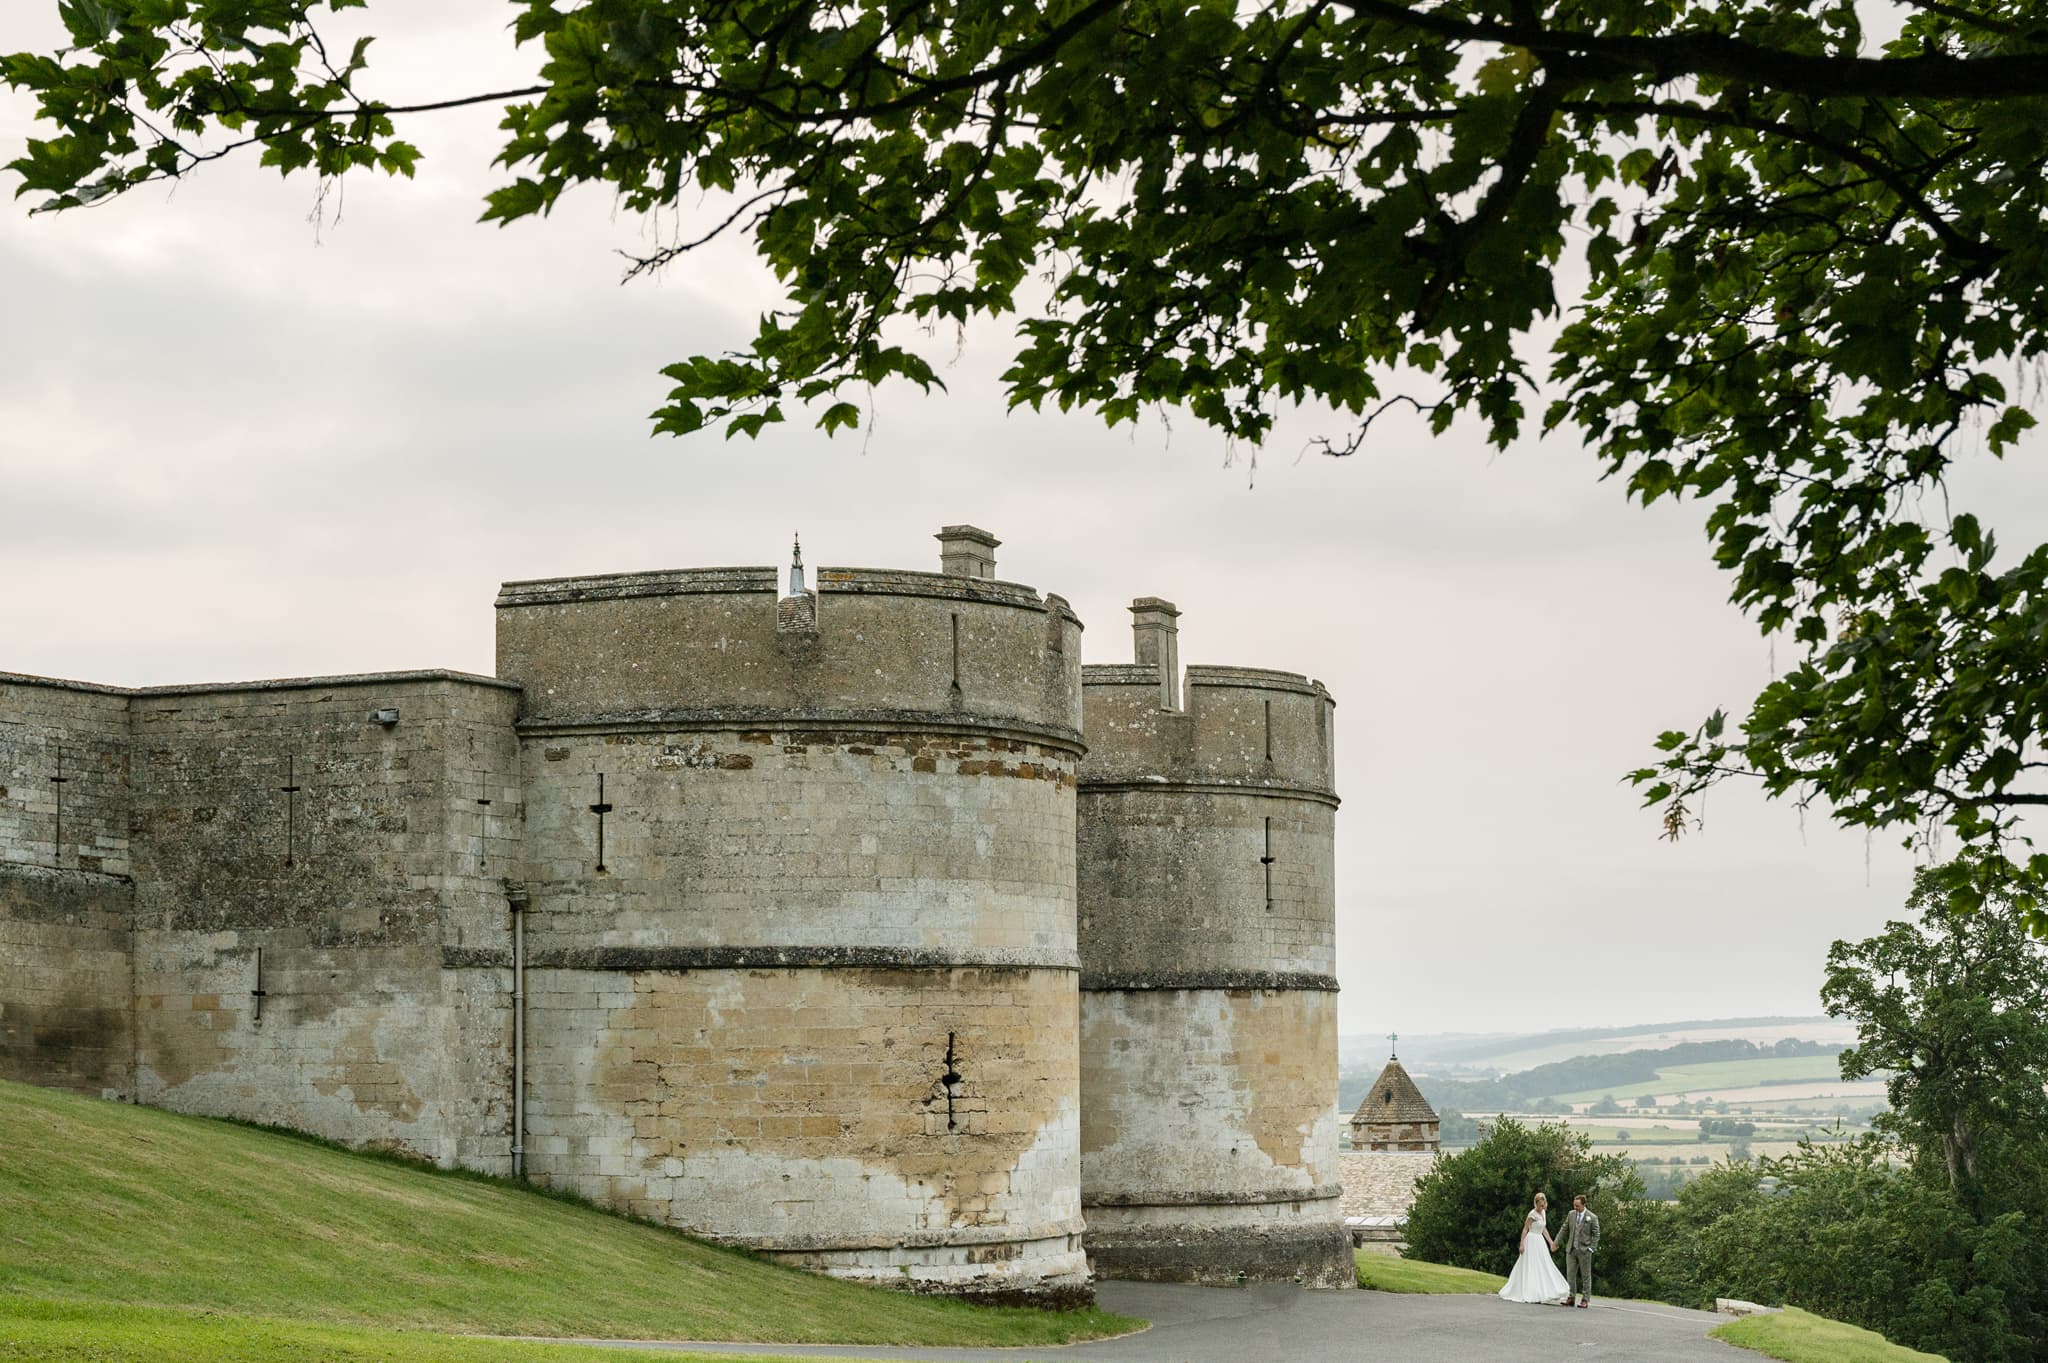 A bride and groom walking in front of the two towers at the entrance to Rockingham Castle